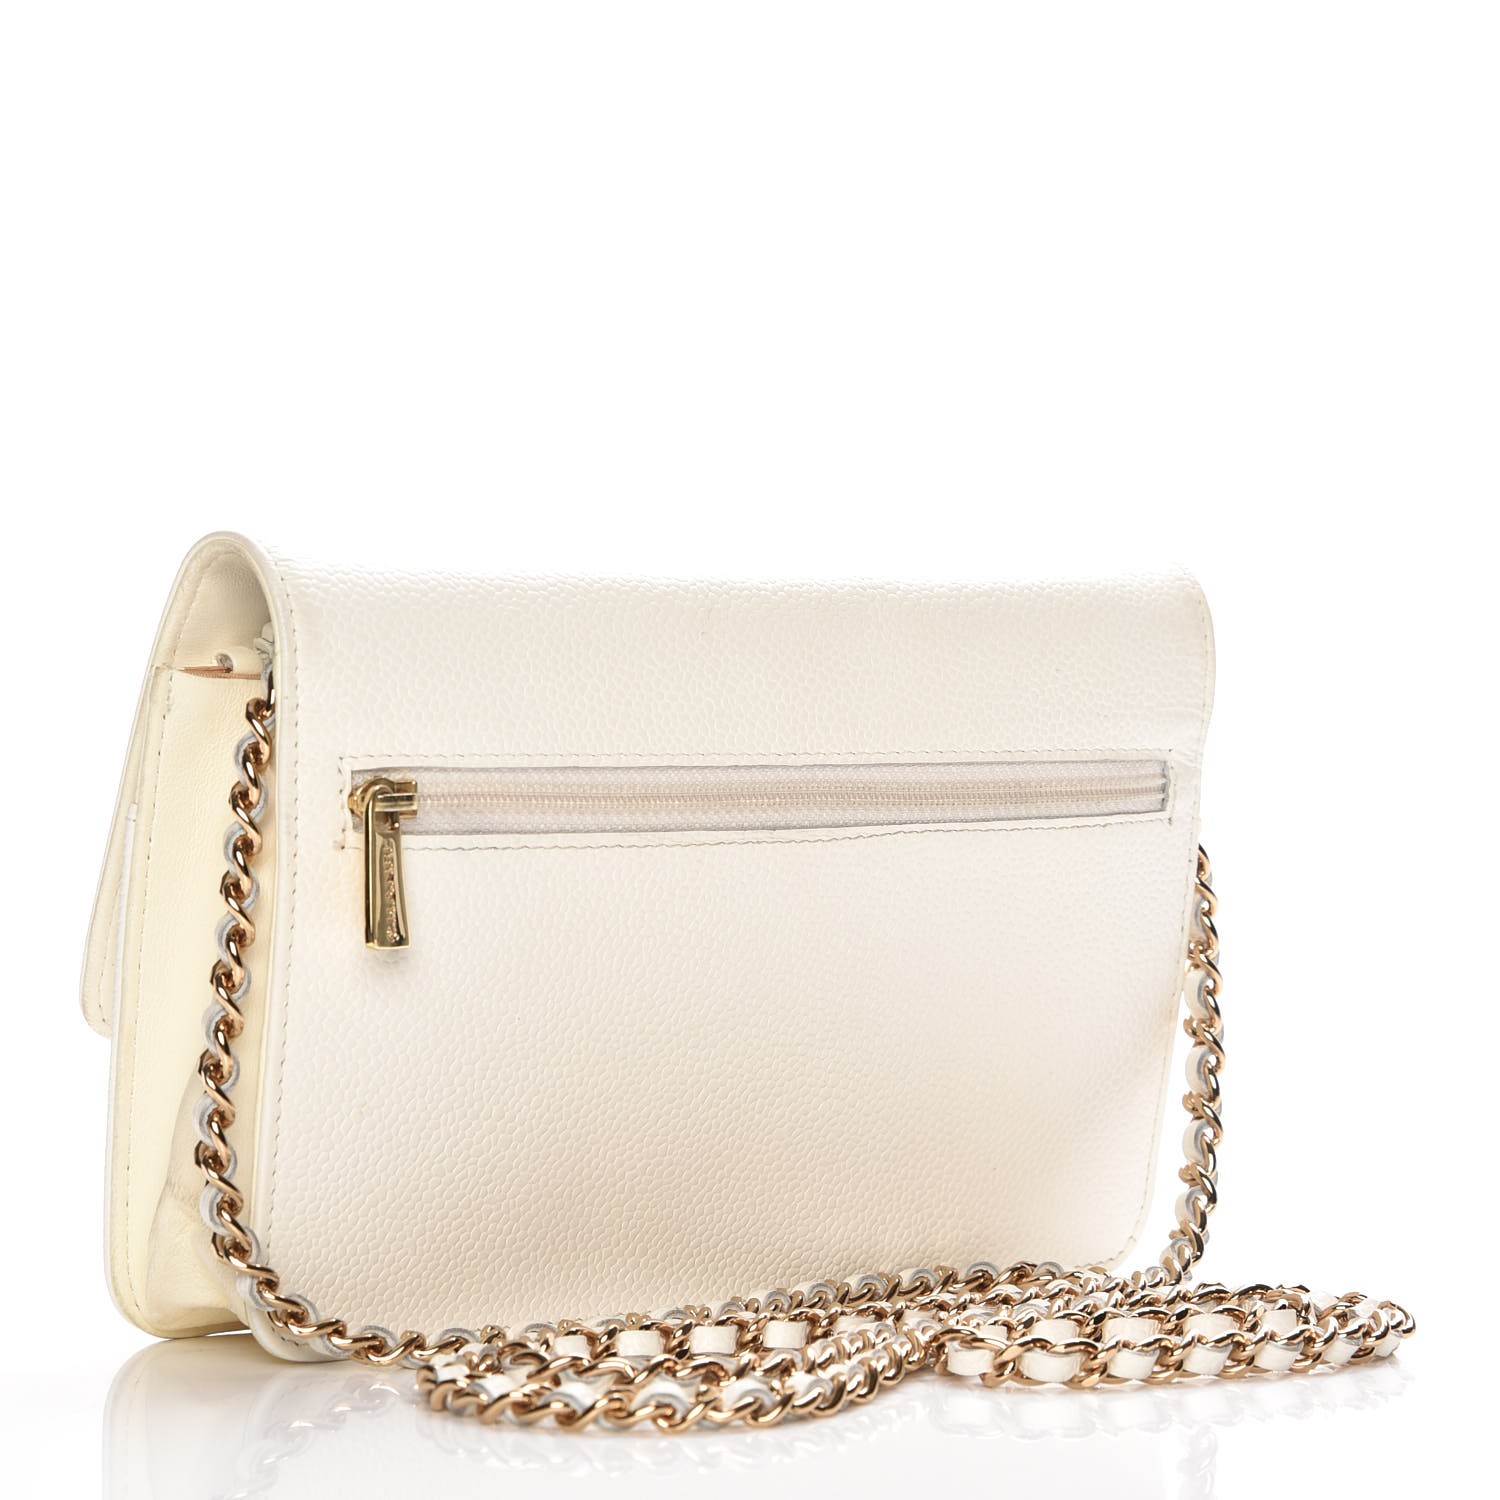 Chanel Wallet On Chain White :: Keweenaw Bay Indian Community